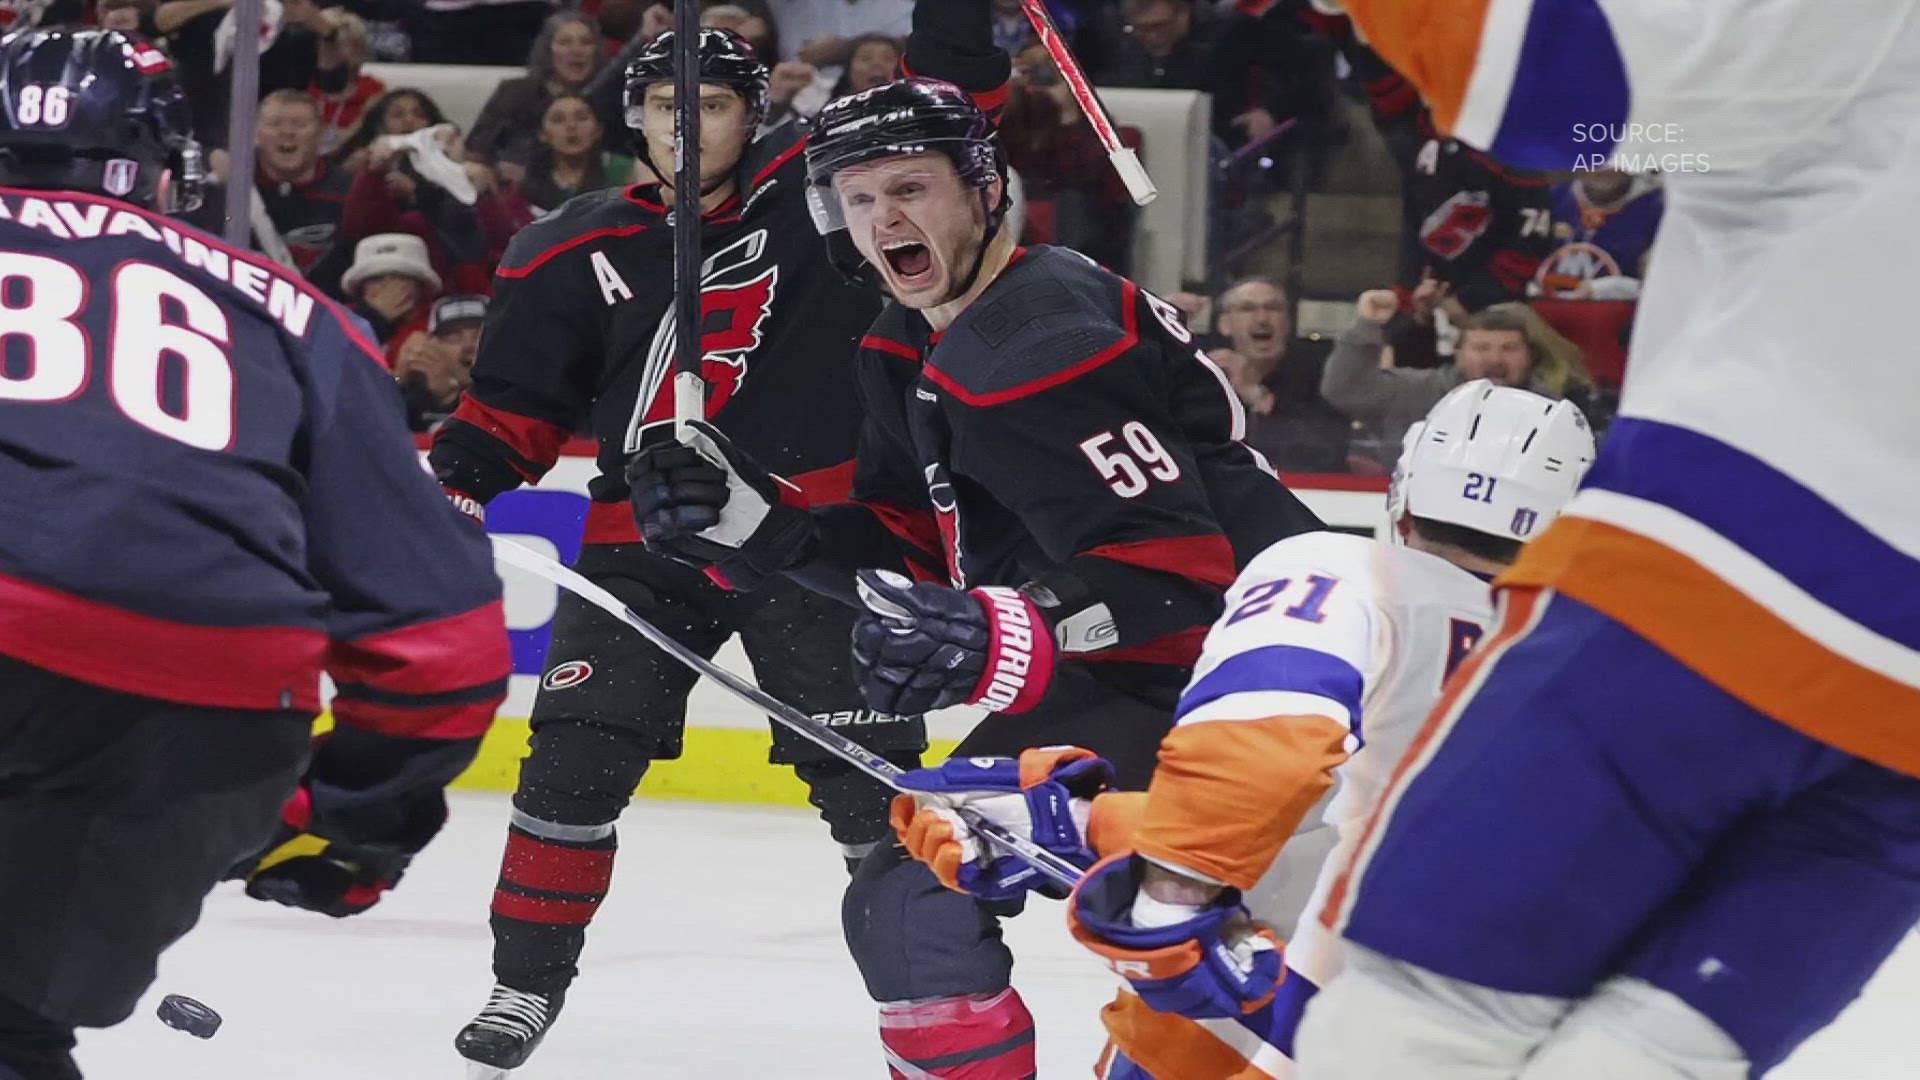 Entering the 3rd period of game 2 against the New York Islanders, the Carolina Hurricanes were down 3-1.